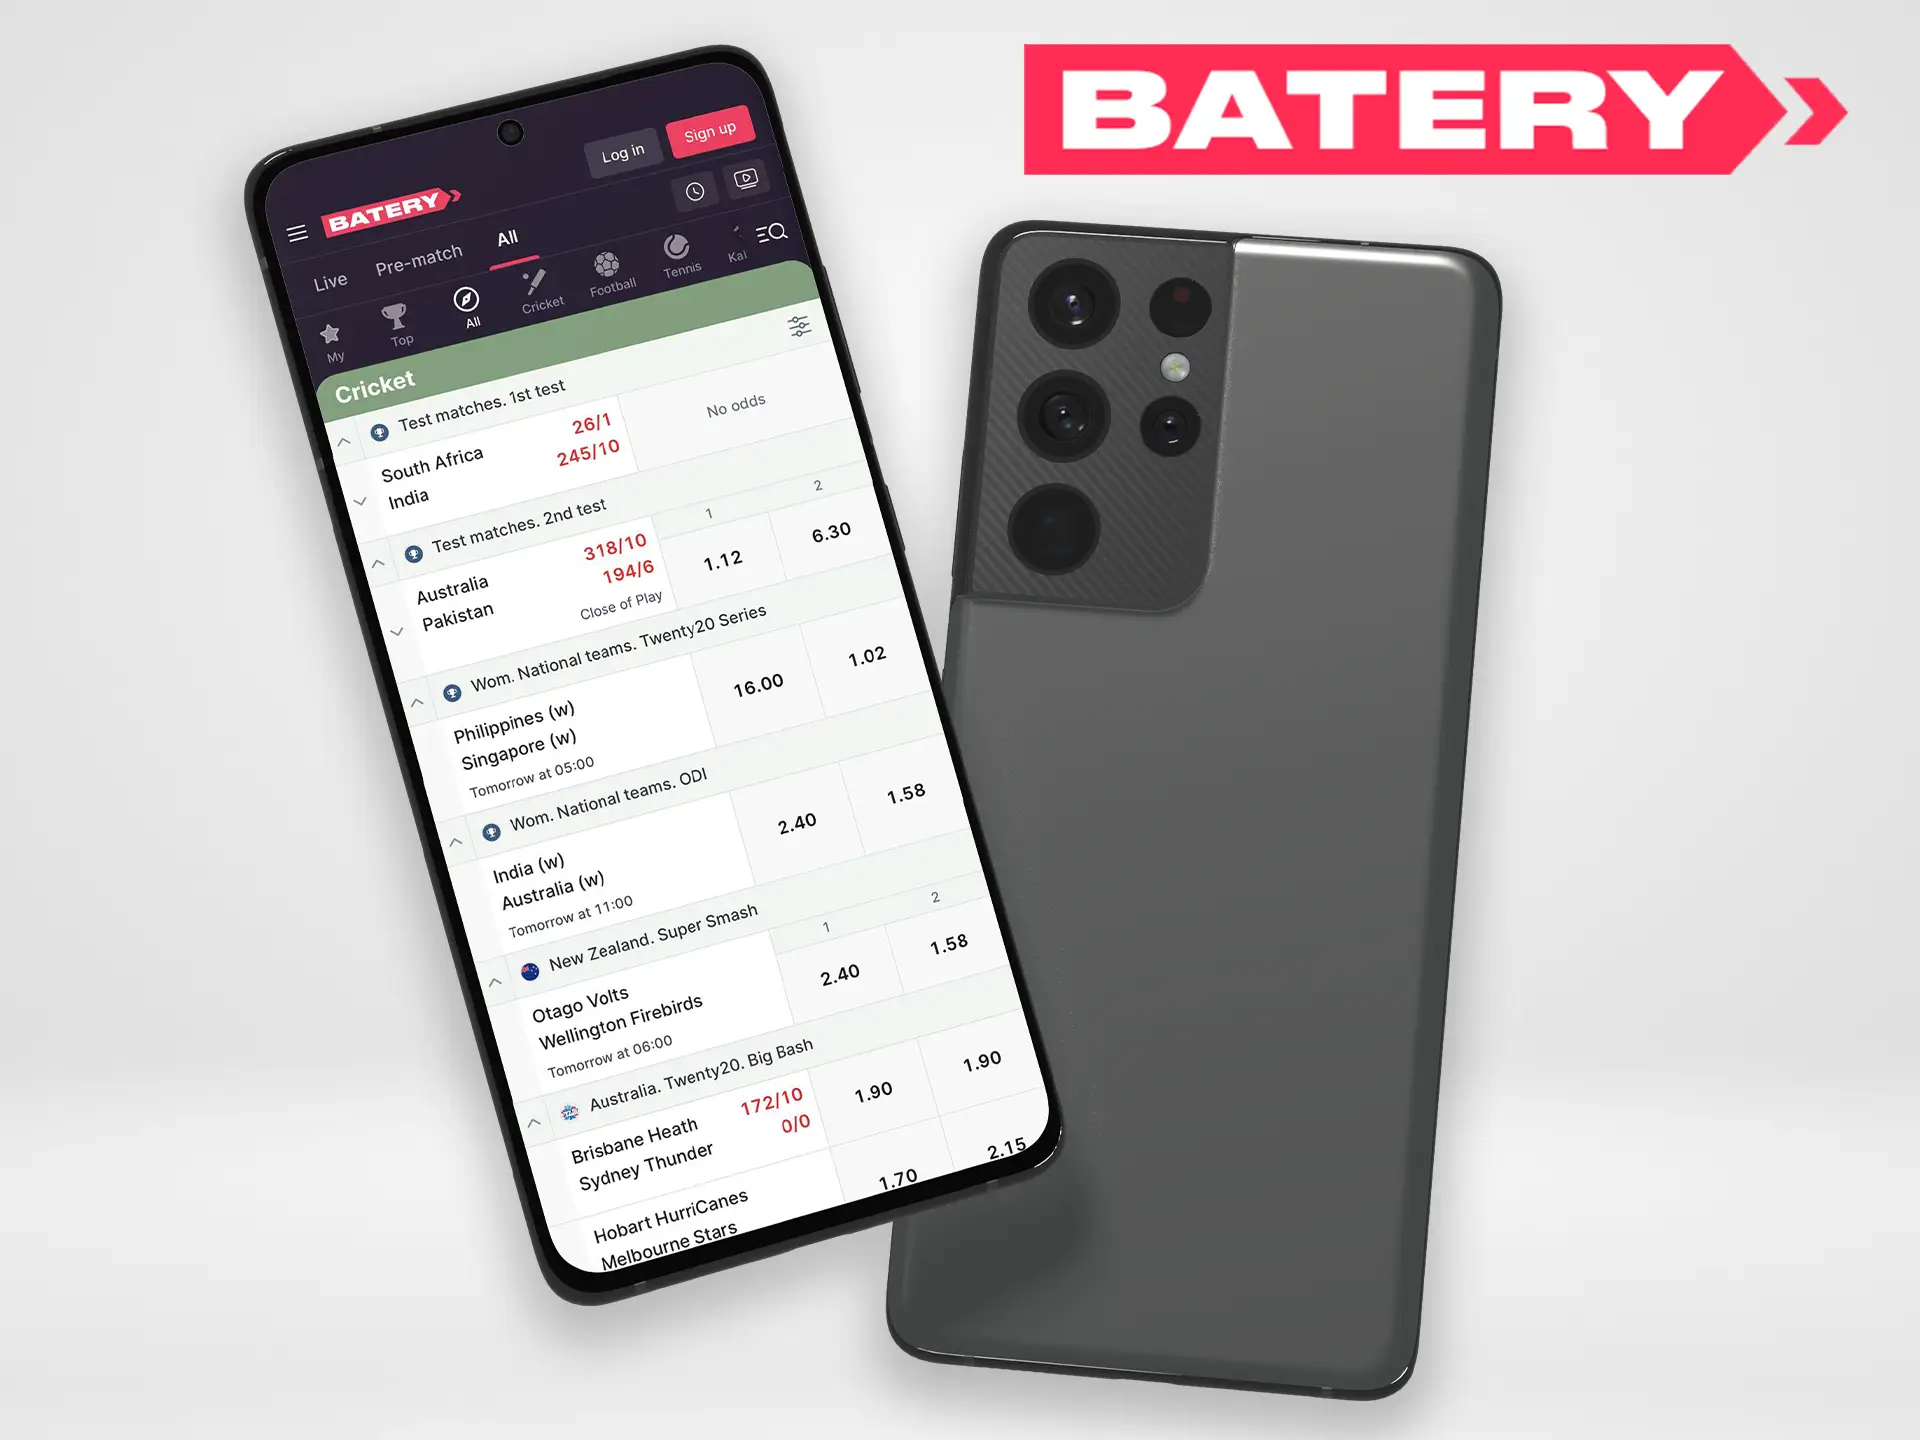 The Batery app is available for Android and iOS owners.